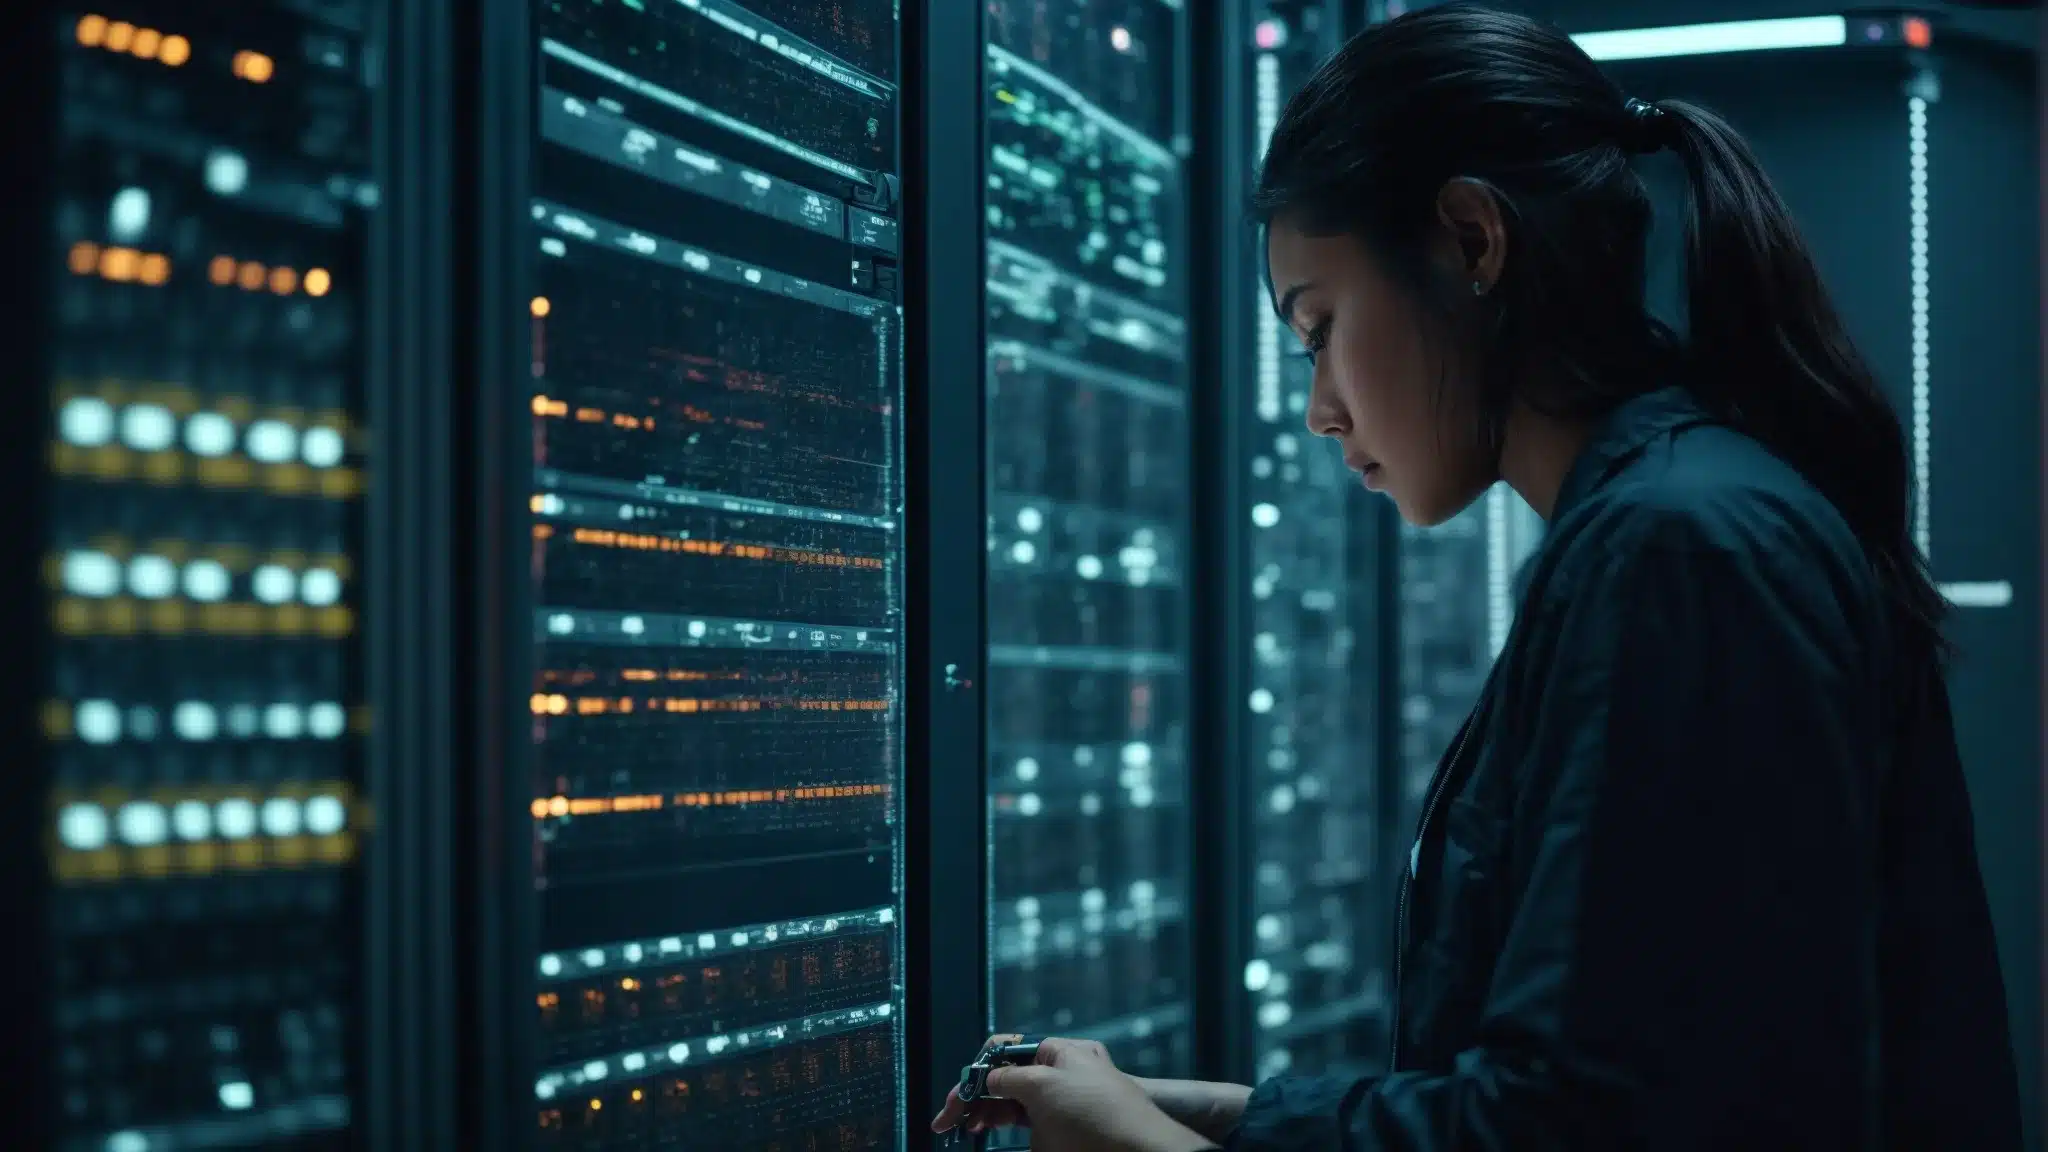 a person adjusting settings on a large, futuristic server room where data about web crawling directives is monitored and updated.